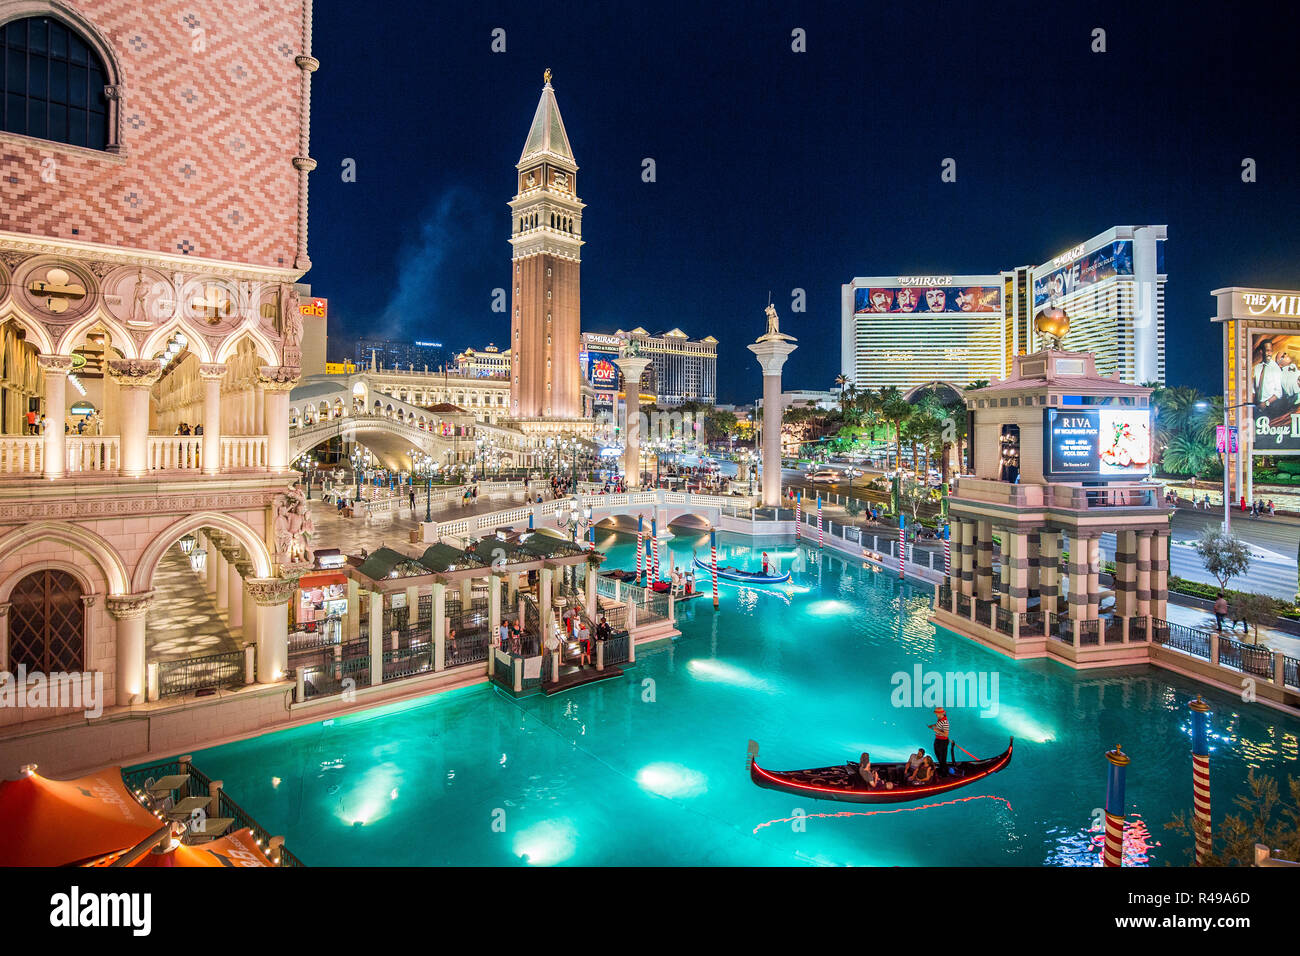 Downtown Las Vegas with world famous Strip and The Venetian and The Mirage Resort Hotels illuminated at night, Nevada, USA Stock Photo